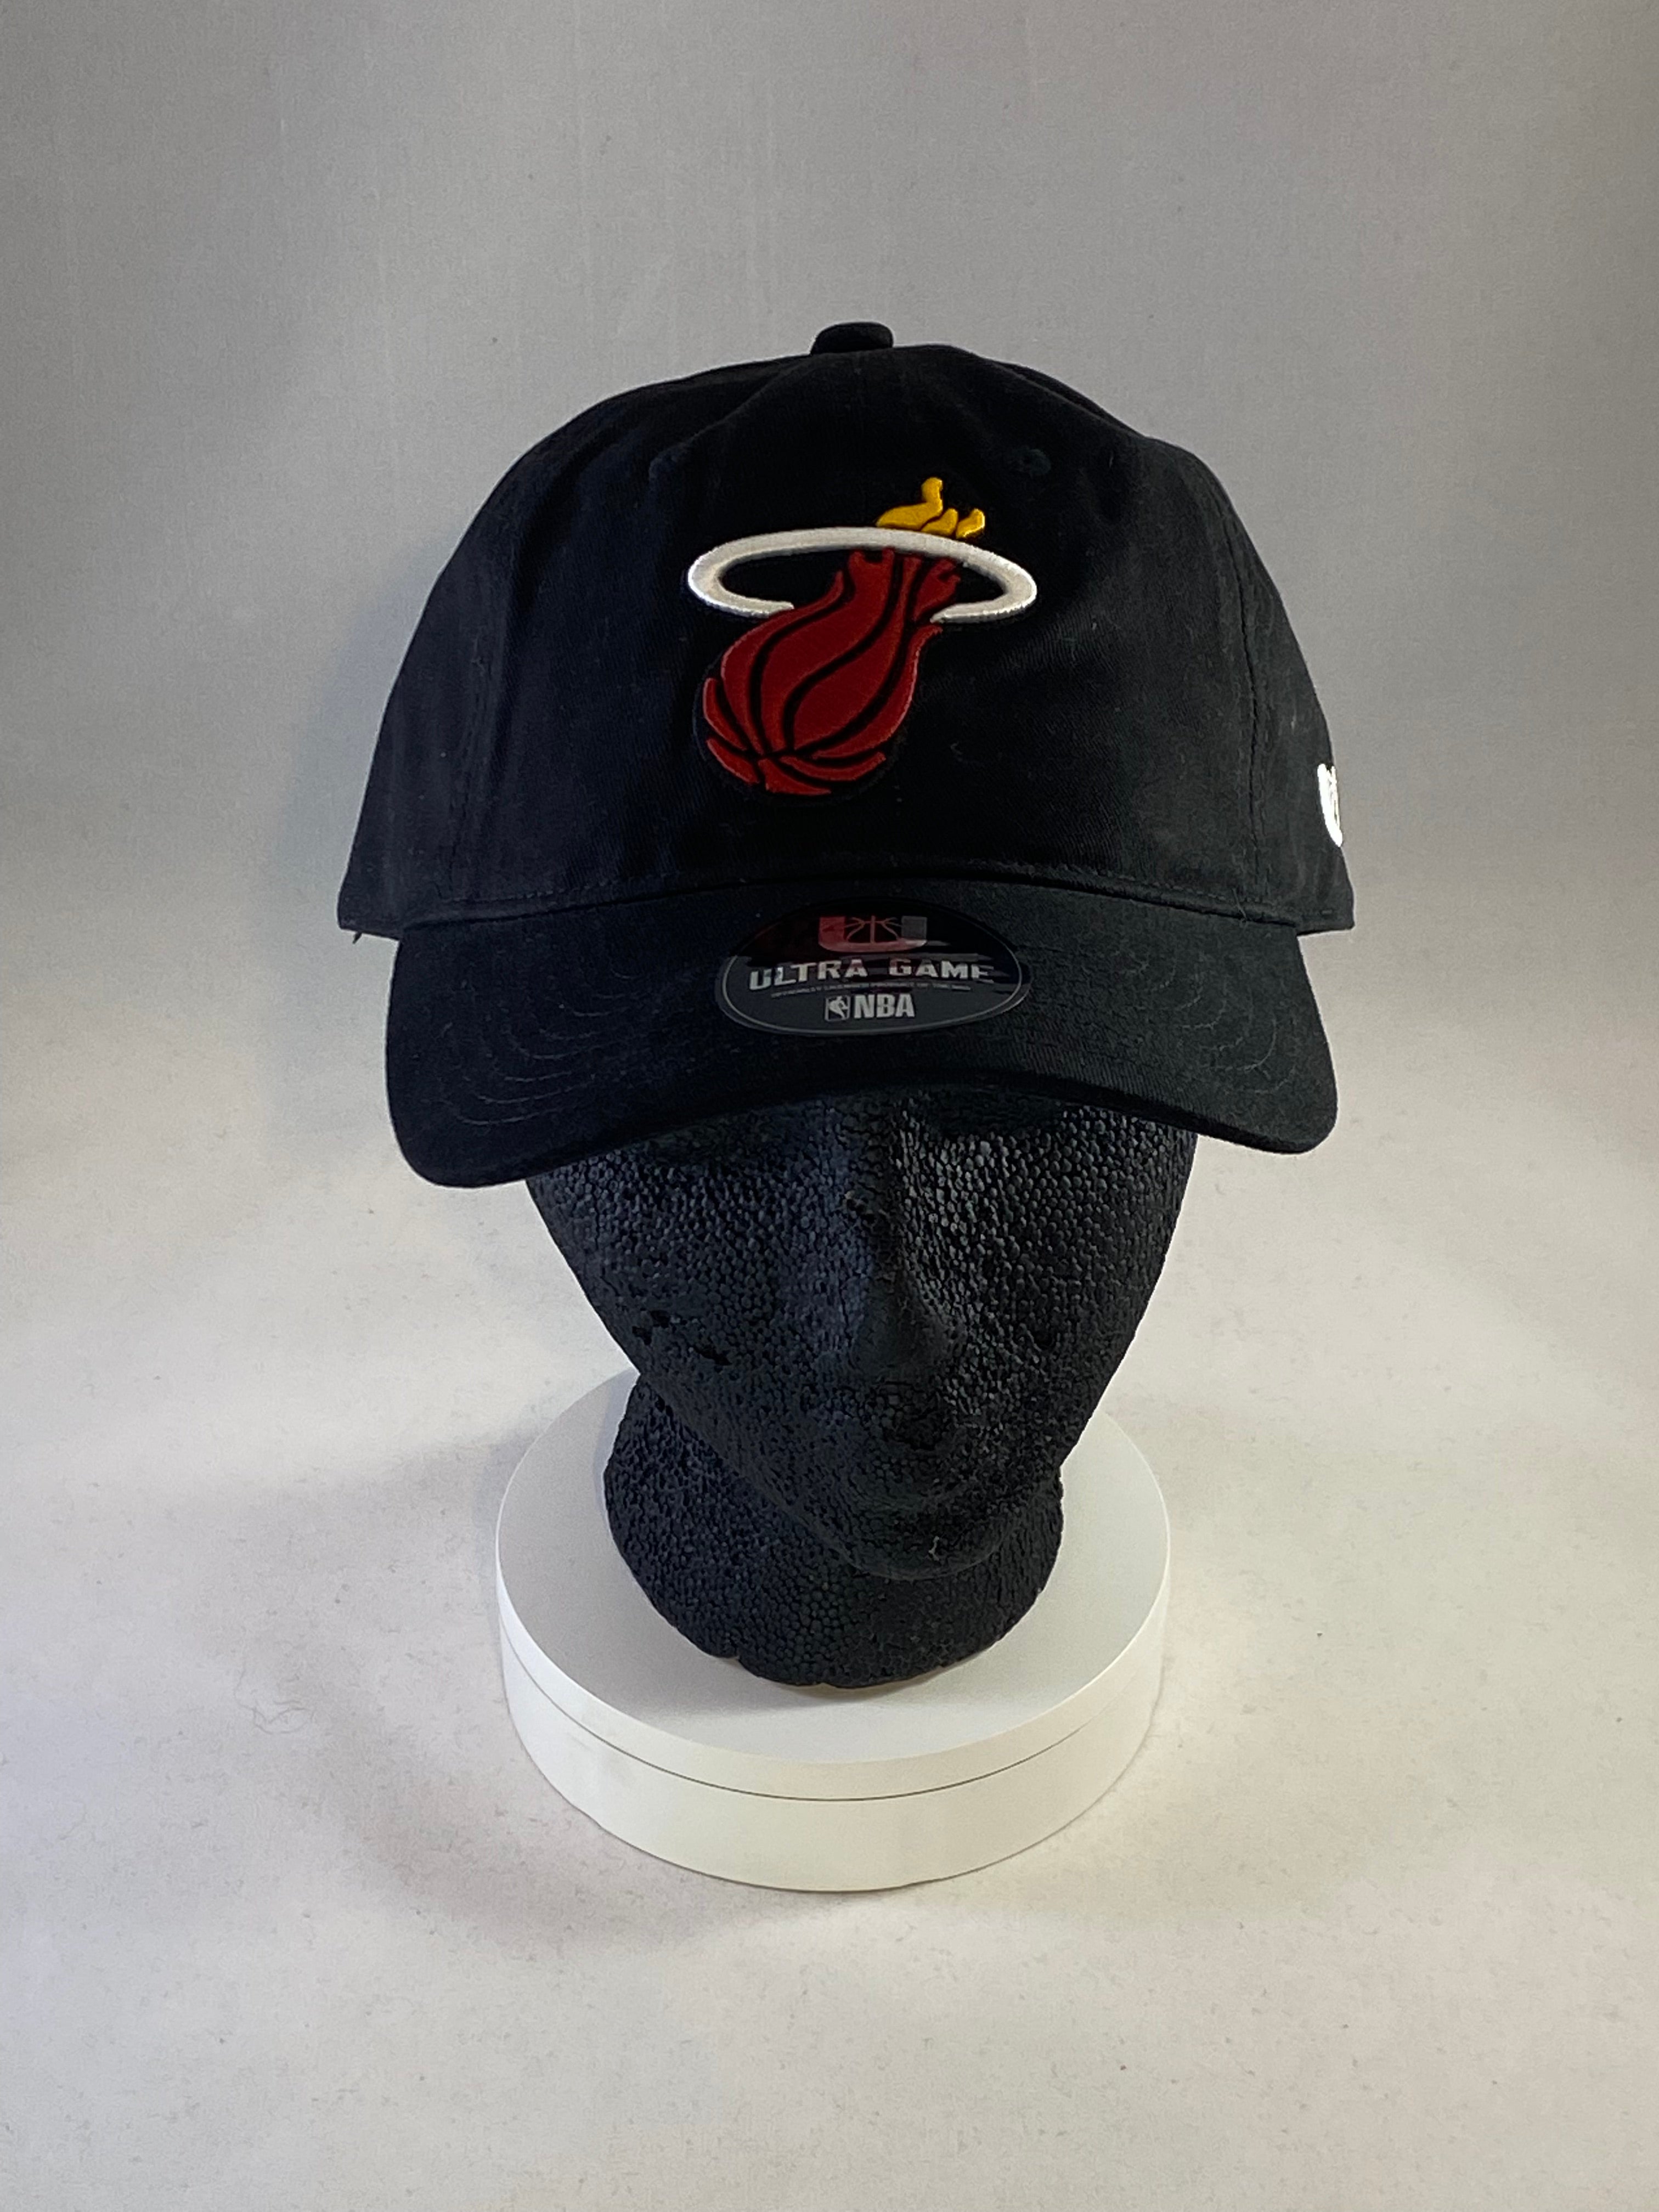 Miami Heat Hats  New, Preowned, and Vintage